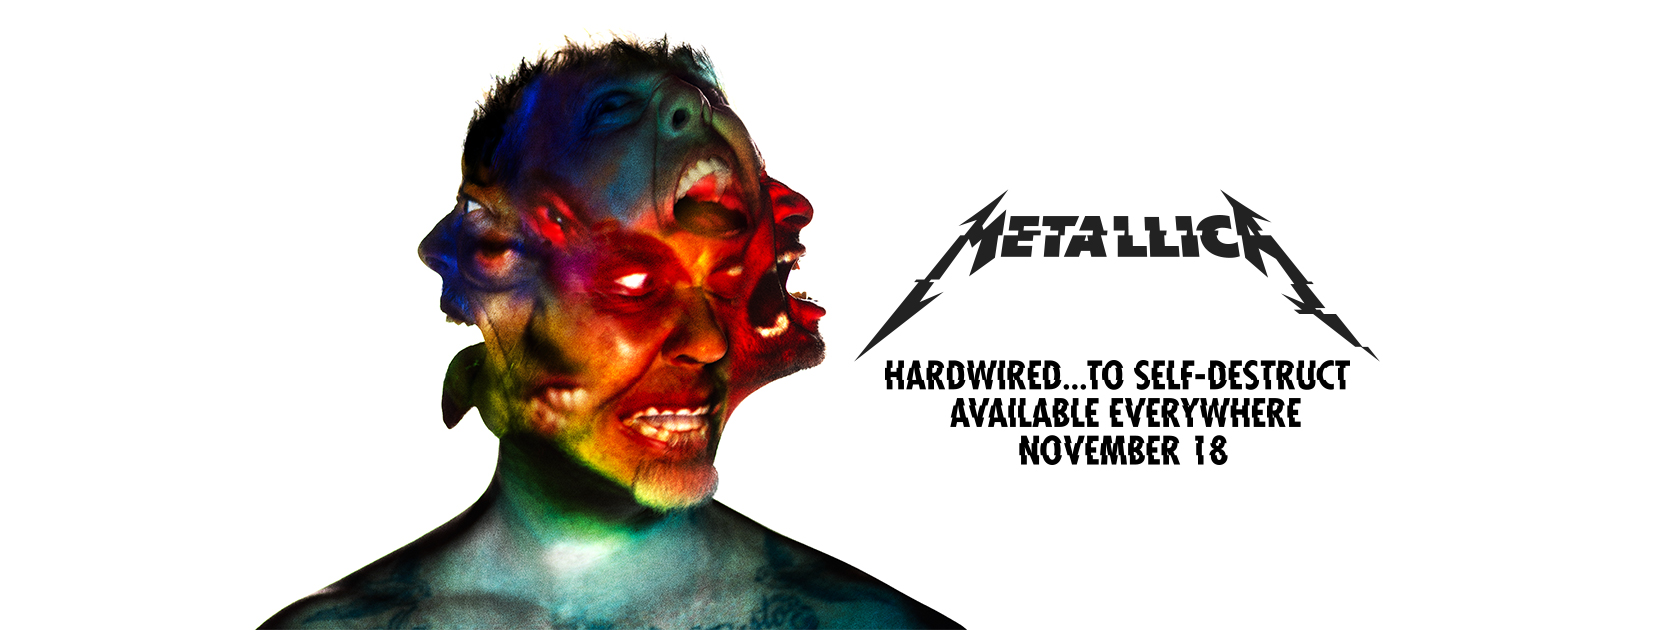 Metallica release music videos for every track on their new album ‘Hardwired… To Self Destruct’